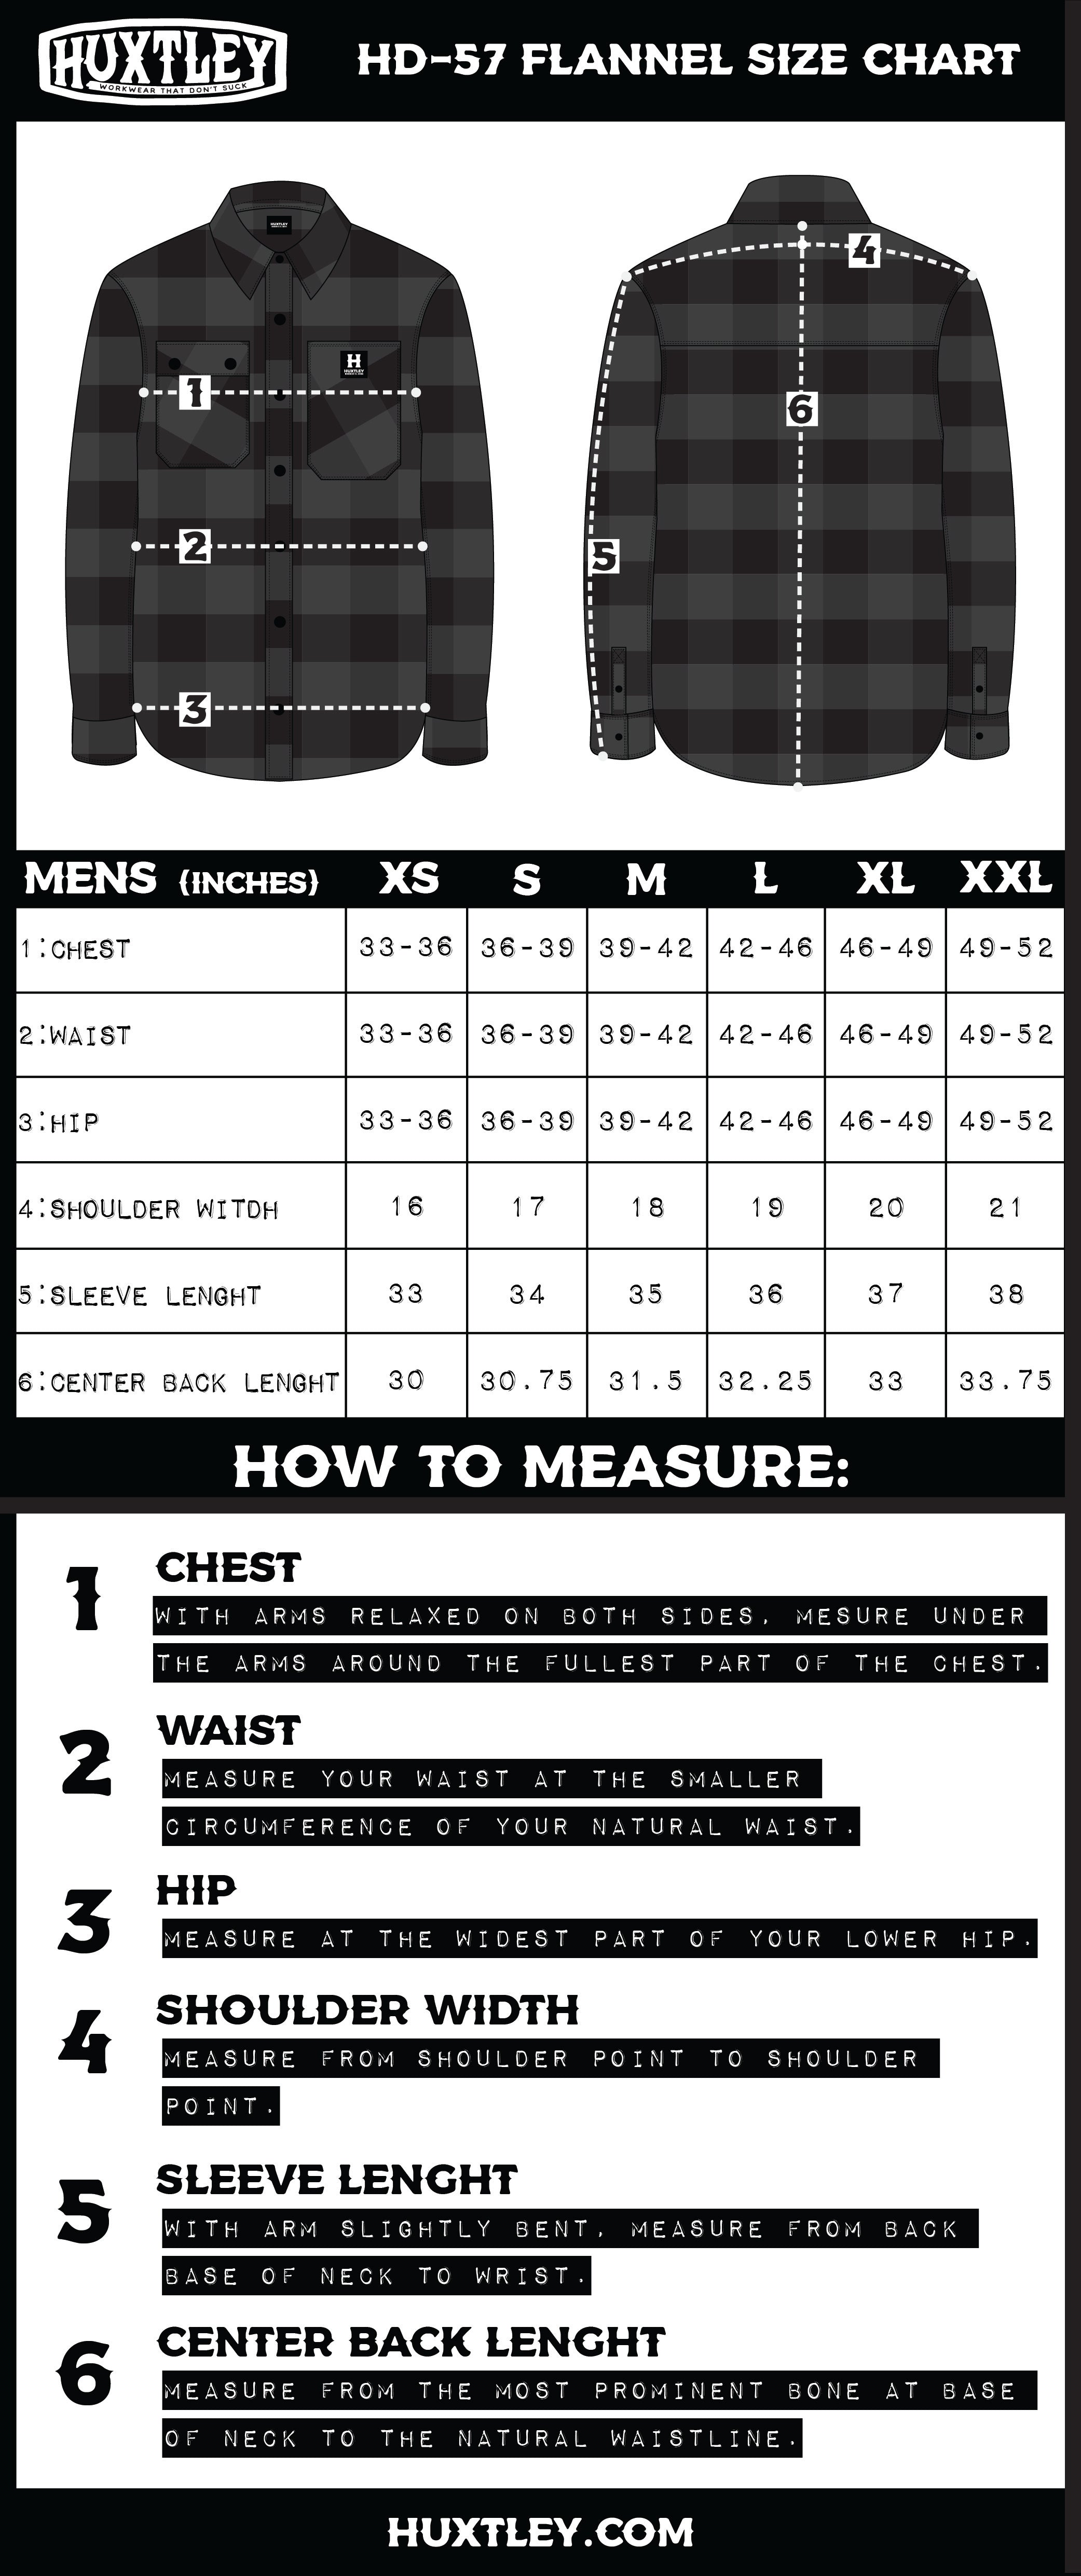 HUXTLEY HD-57 FLANNELS SIZING GUIDE SIZE CHART